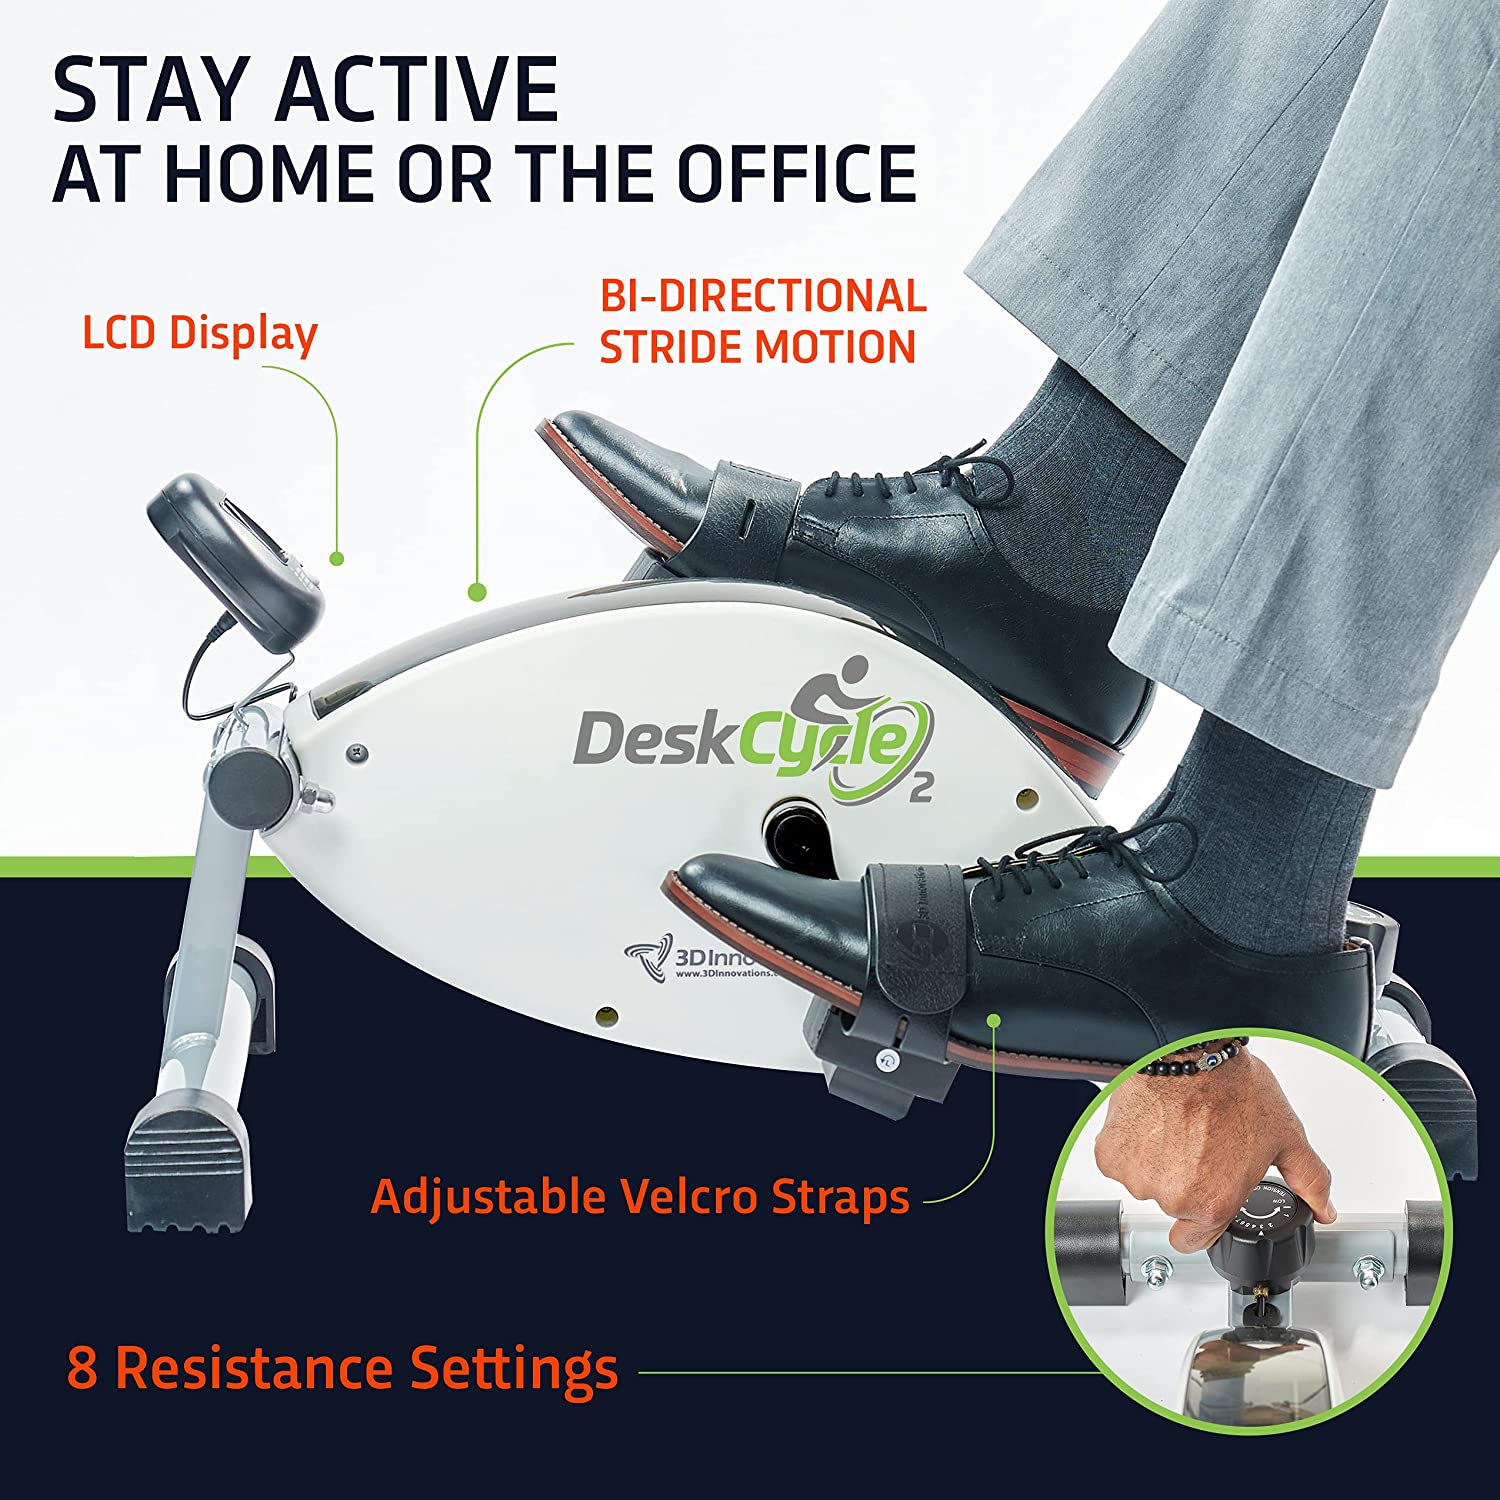 DeskCycle 2 Under Desk Bike Pedal Exerciser with Adjustable Leg - Mini Exercise Bike Desk Cycle, Leg Exerciser for Physical Therapy & Desk Exercise - image 3 of 9